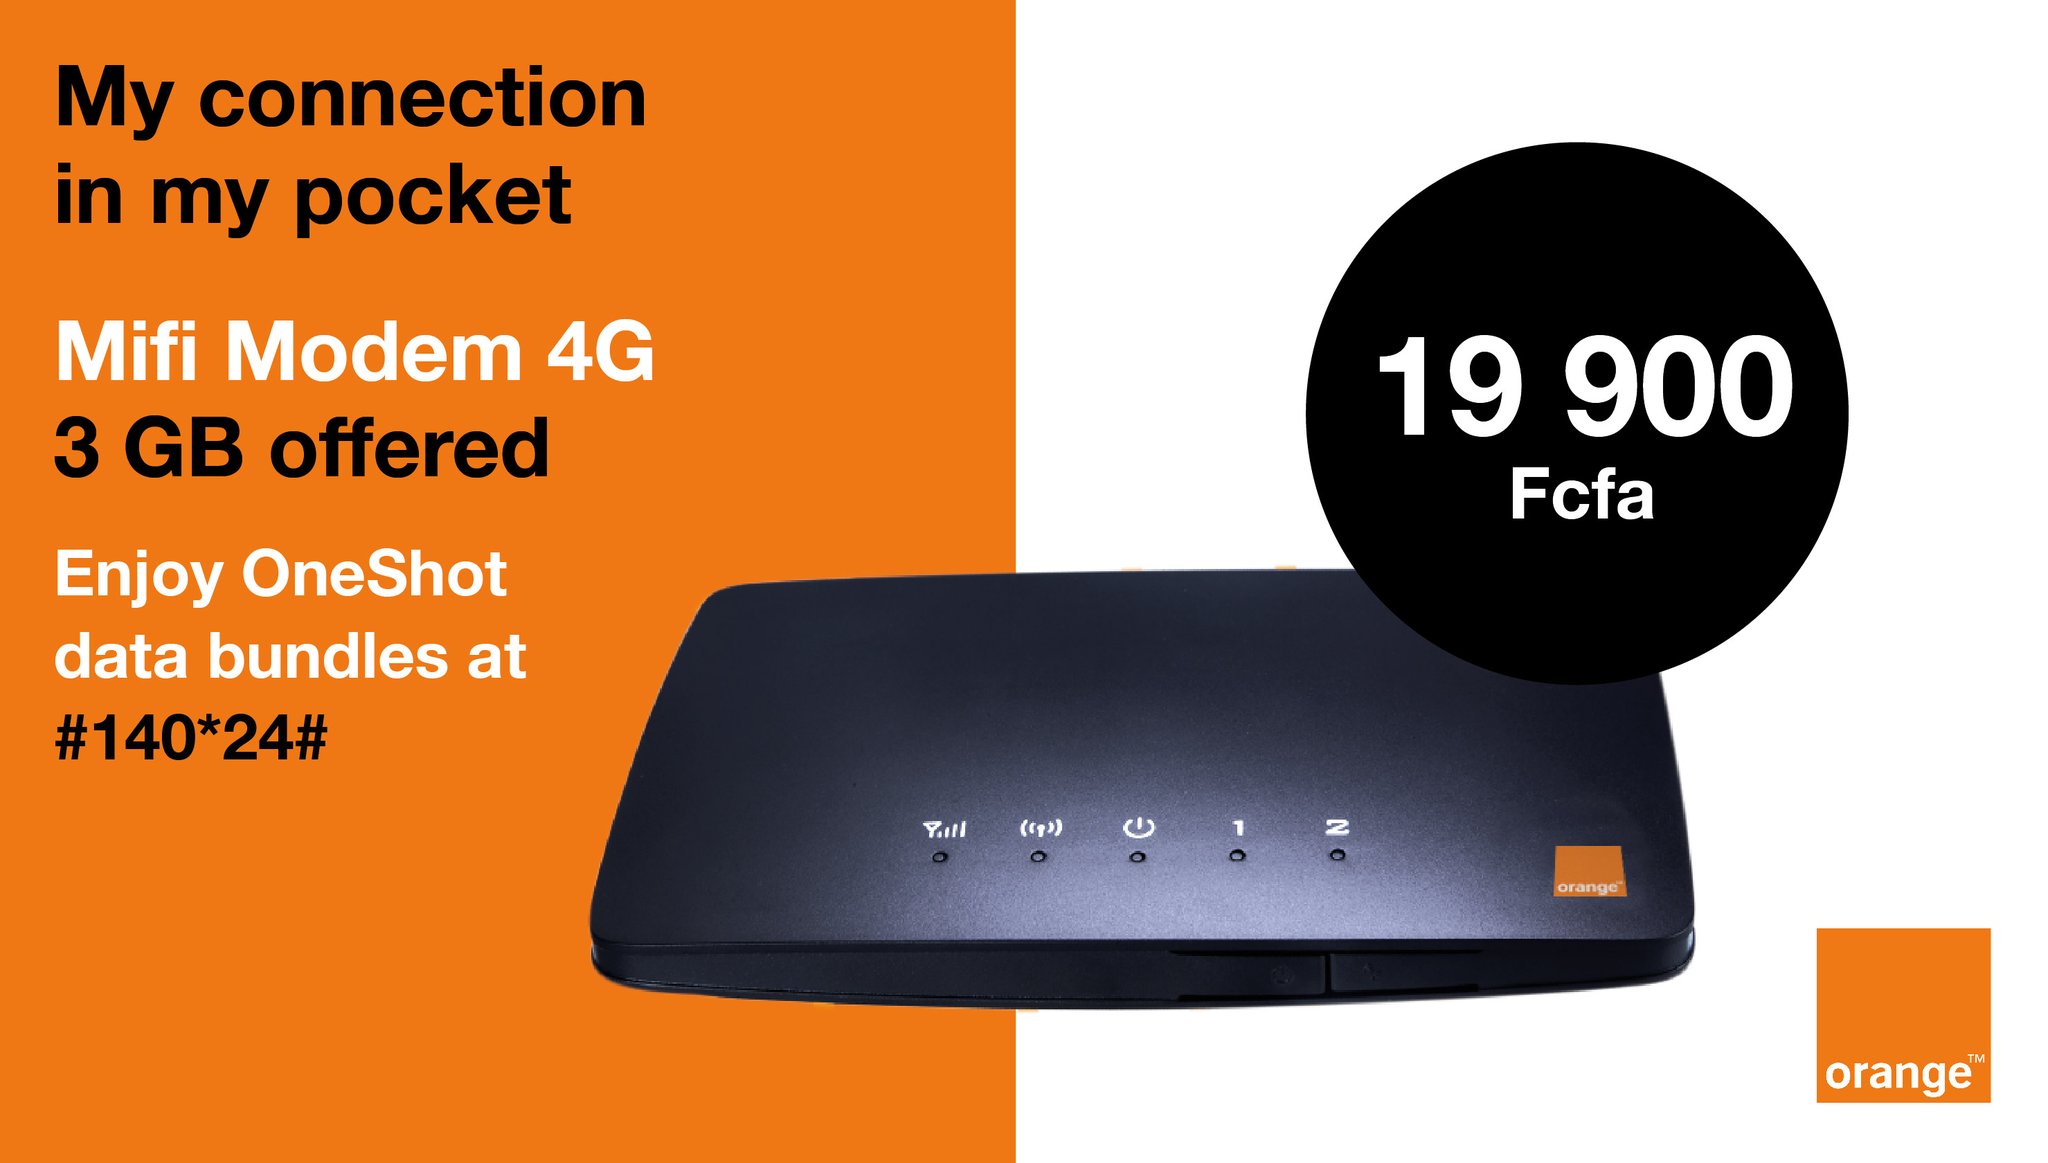 pizza Diplomacy Nerve Orange Cameroun on Twitter: "Stay connected wherever you are, at home and  at the office thanks to your modem mifi 4G available at 19,000 CFAF only  with 3 GB internet offered. Visit